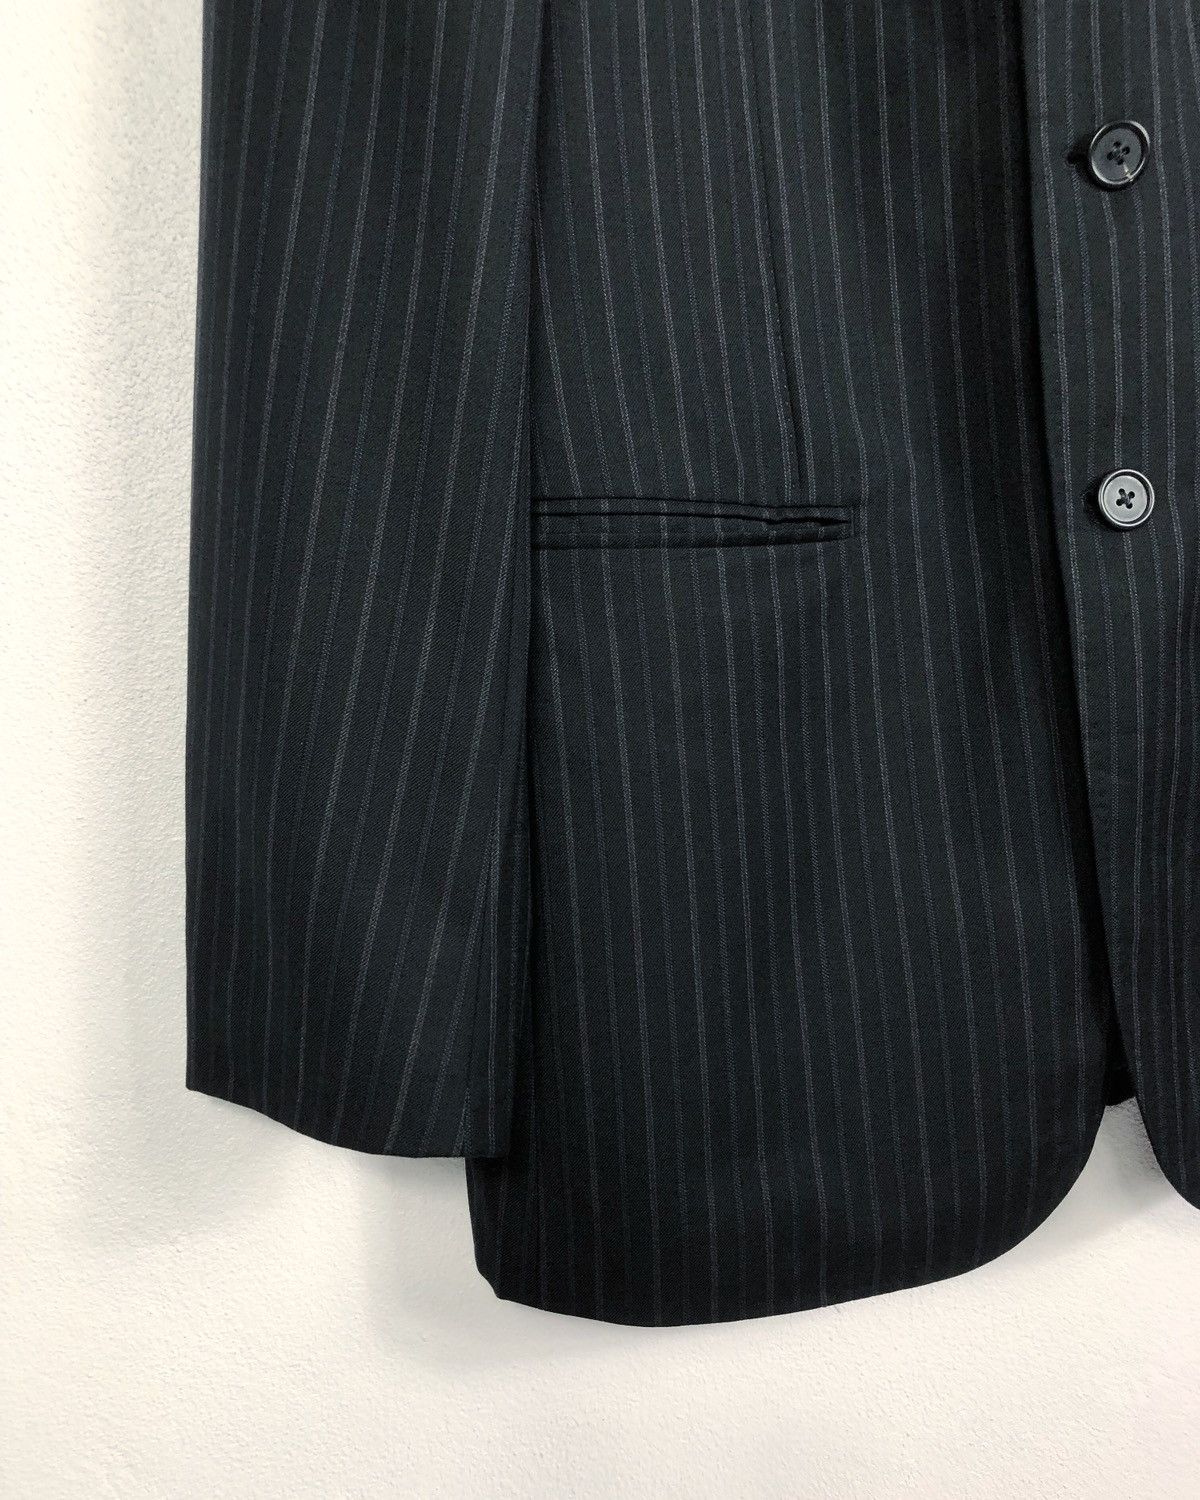 Paul Smith Rare Paul Smith London Blazer Suit Made in Italy Size US L / EU 52-54 / 3 - 4 Thumbnail